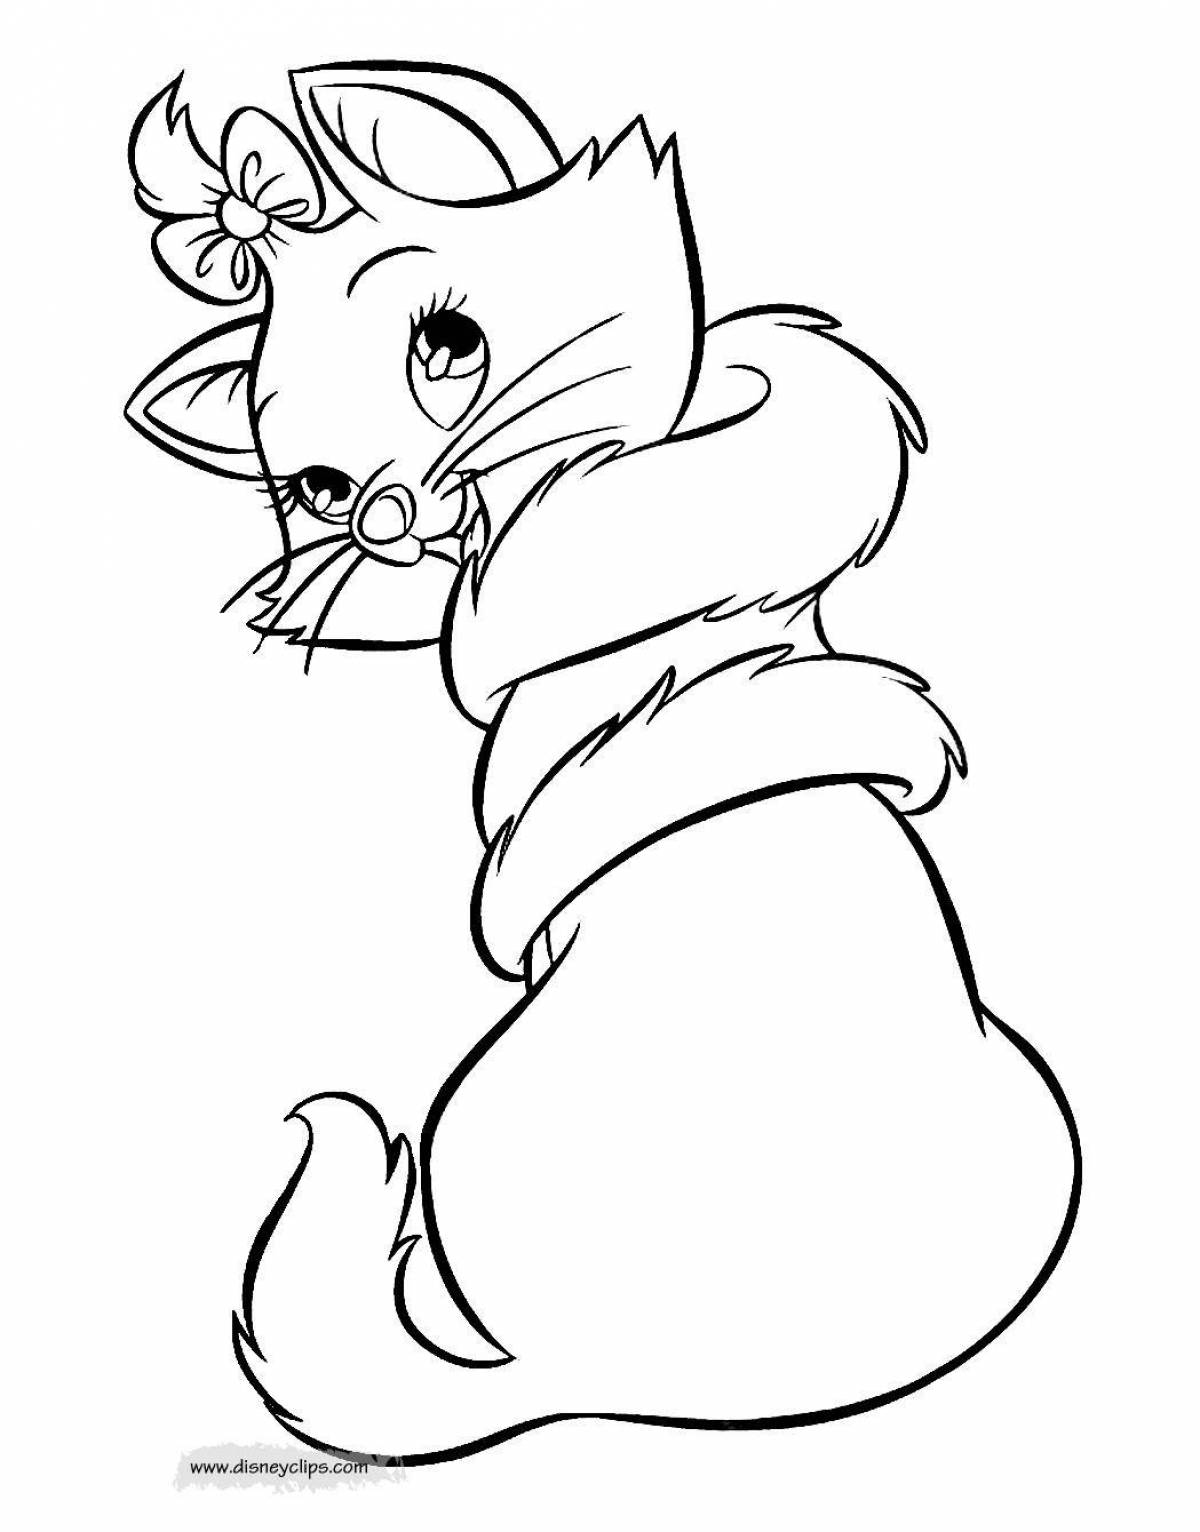 Naughty Christmas cats coloring page